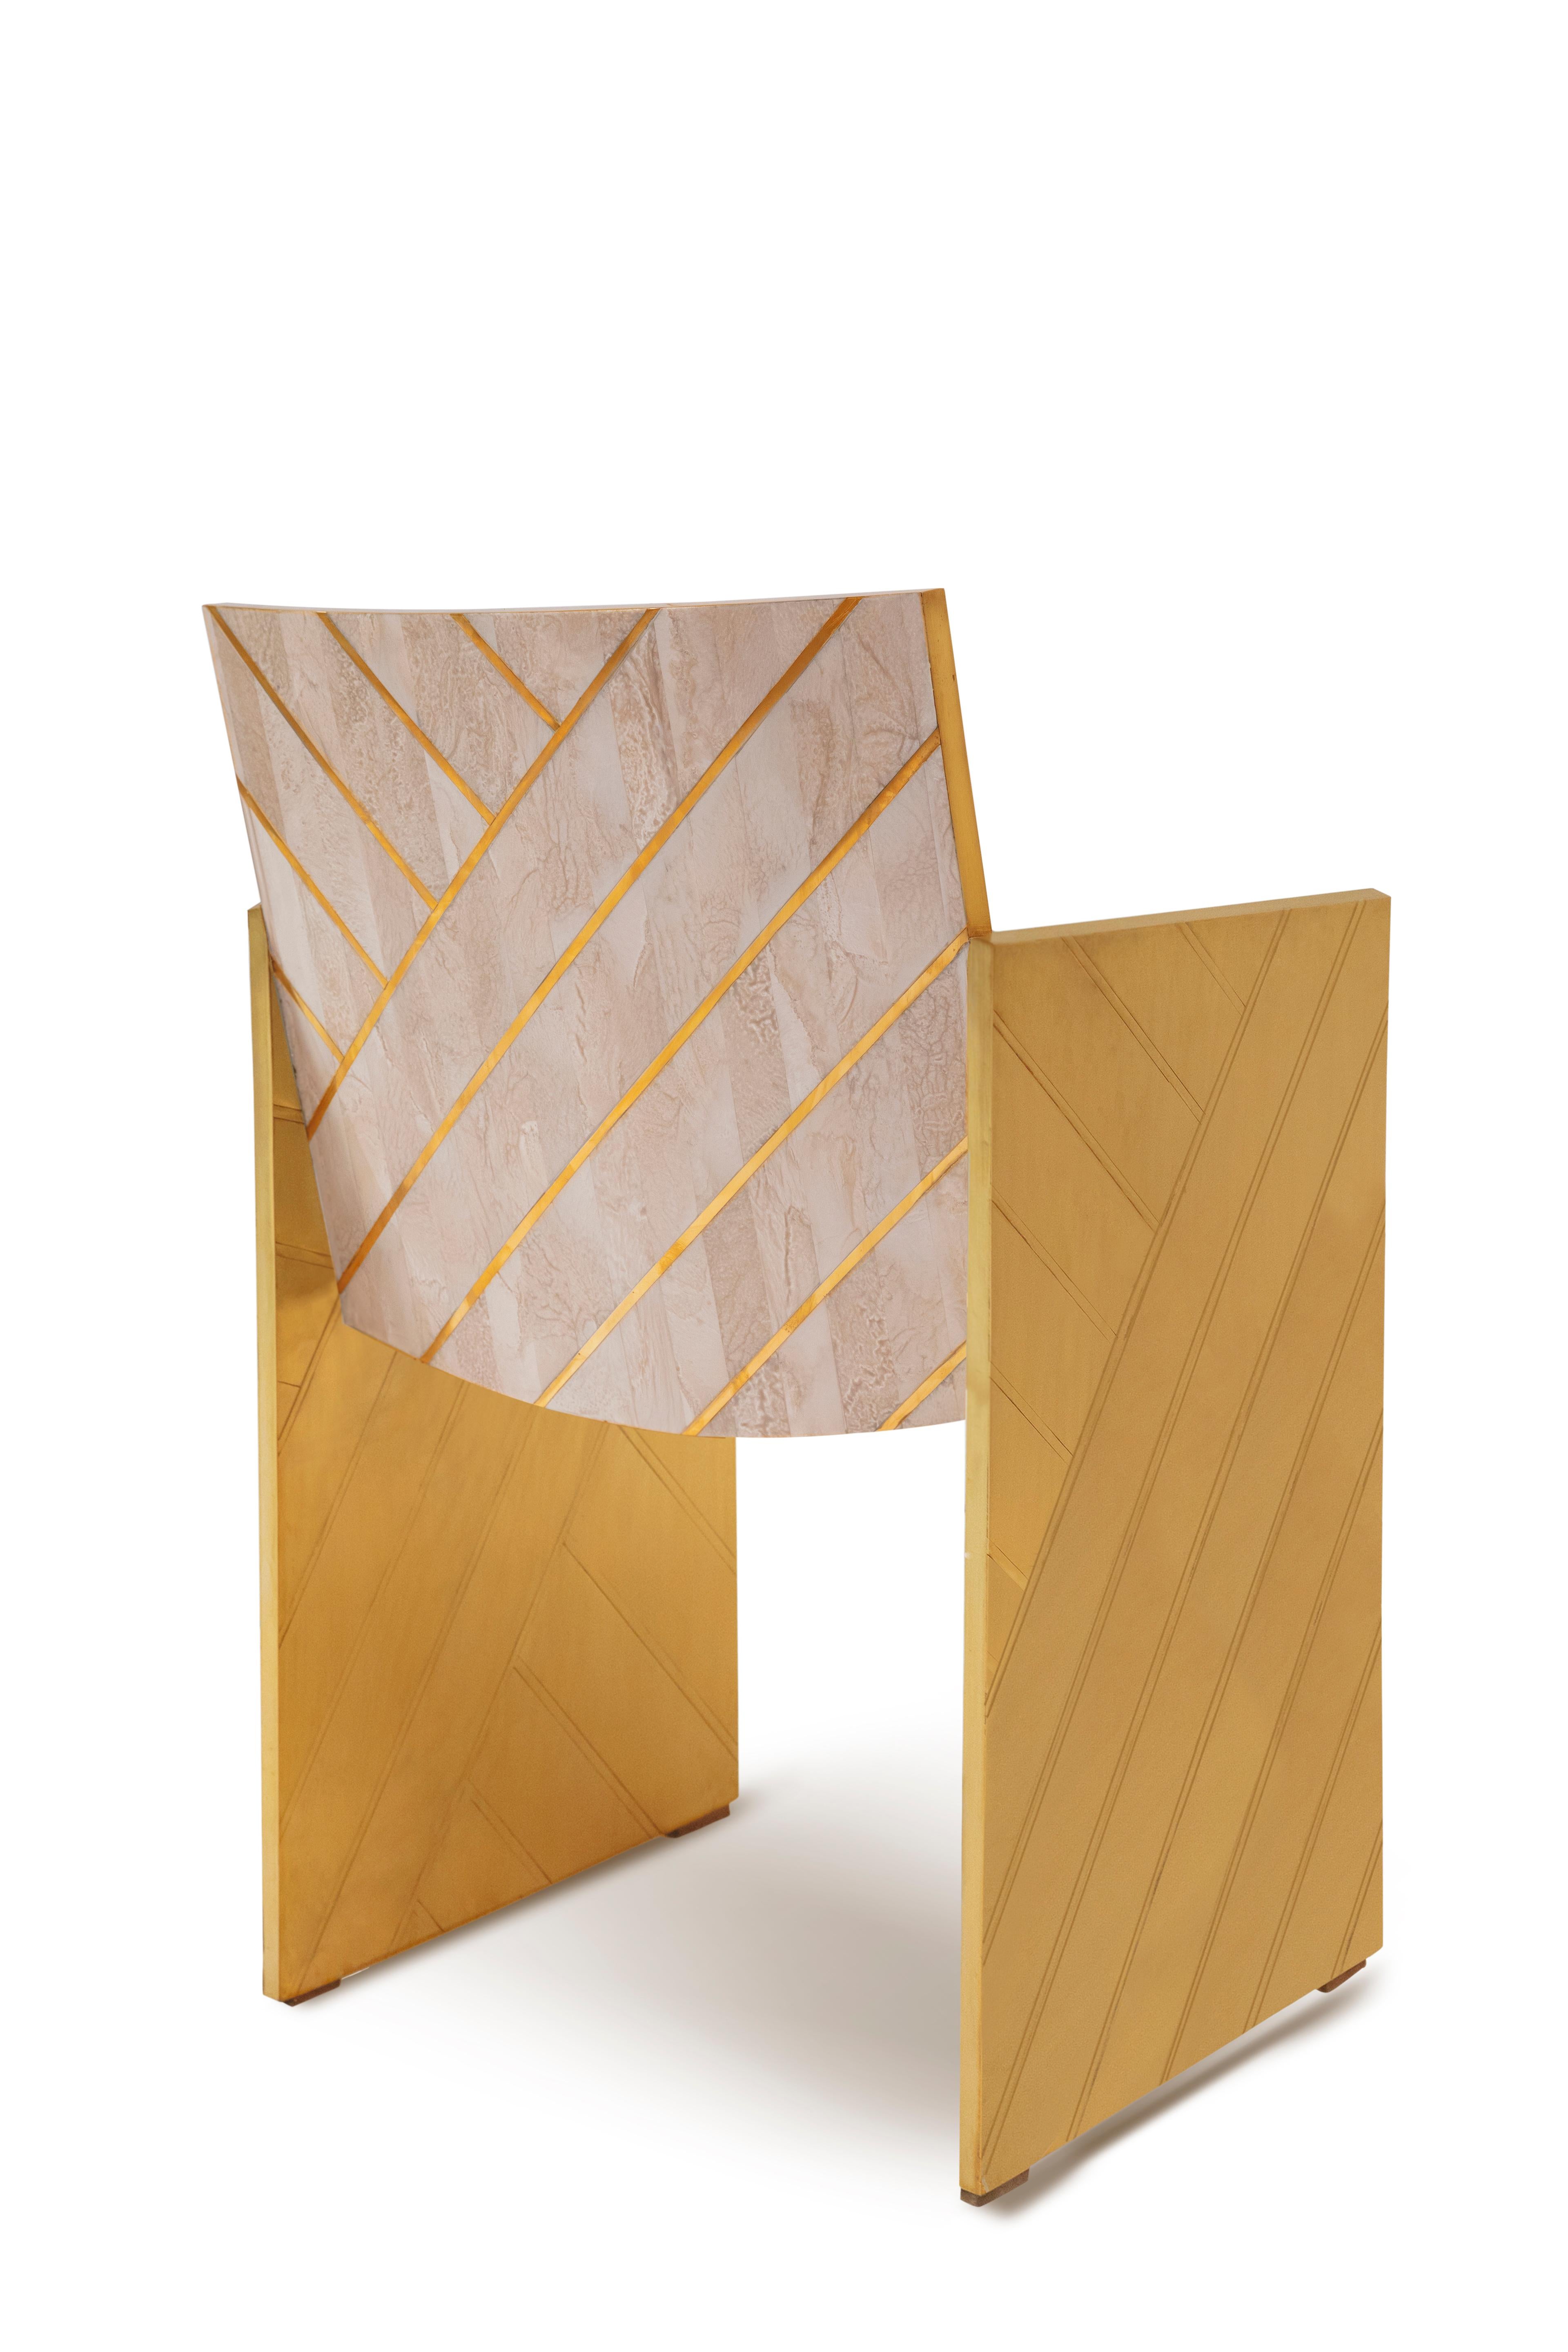 Nesso Beige and Pink Dining Chair with Brass Inlay by Matteo Cibic is a beautiful chair in pearly resin with geometric brass inlay. It can be matched beautifully with the Nesso dining rable. It comes in three colors - Beige, gray and mint.

Awarded